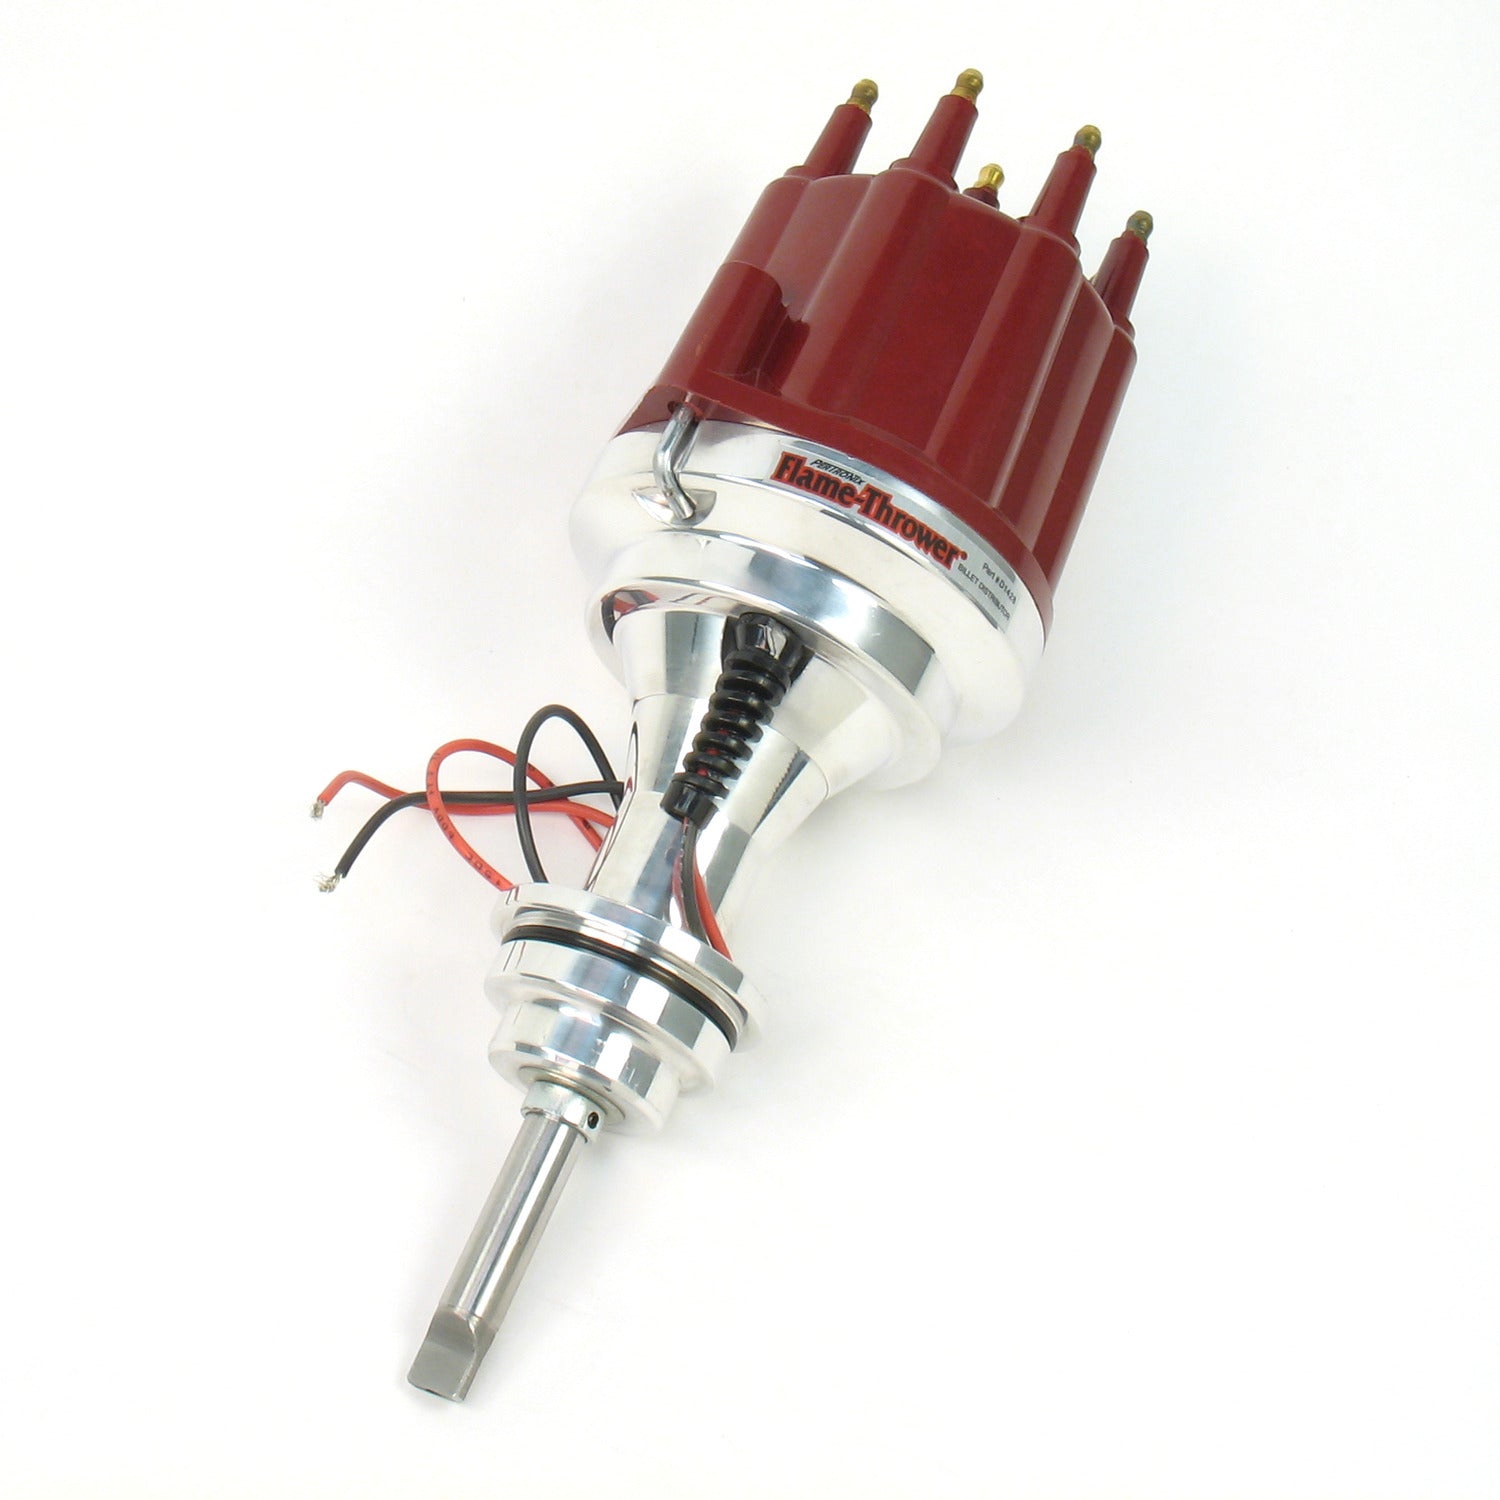 PerTronix D142811 Flame-Thrower Electronic Distributor Billet Chrysler/Dodge/Plymouth 383-400 Plug and Play with Ignitor II Technology Non Vacuum Advance Red Male Cap